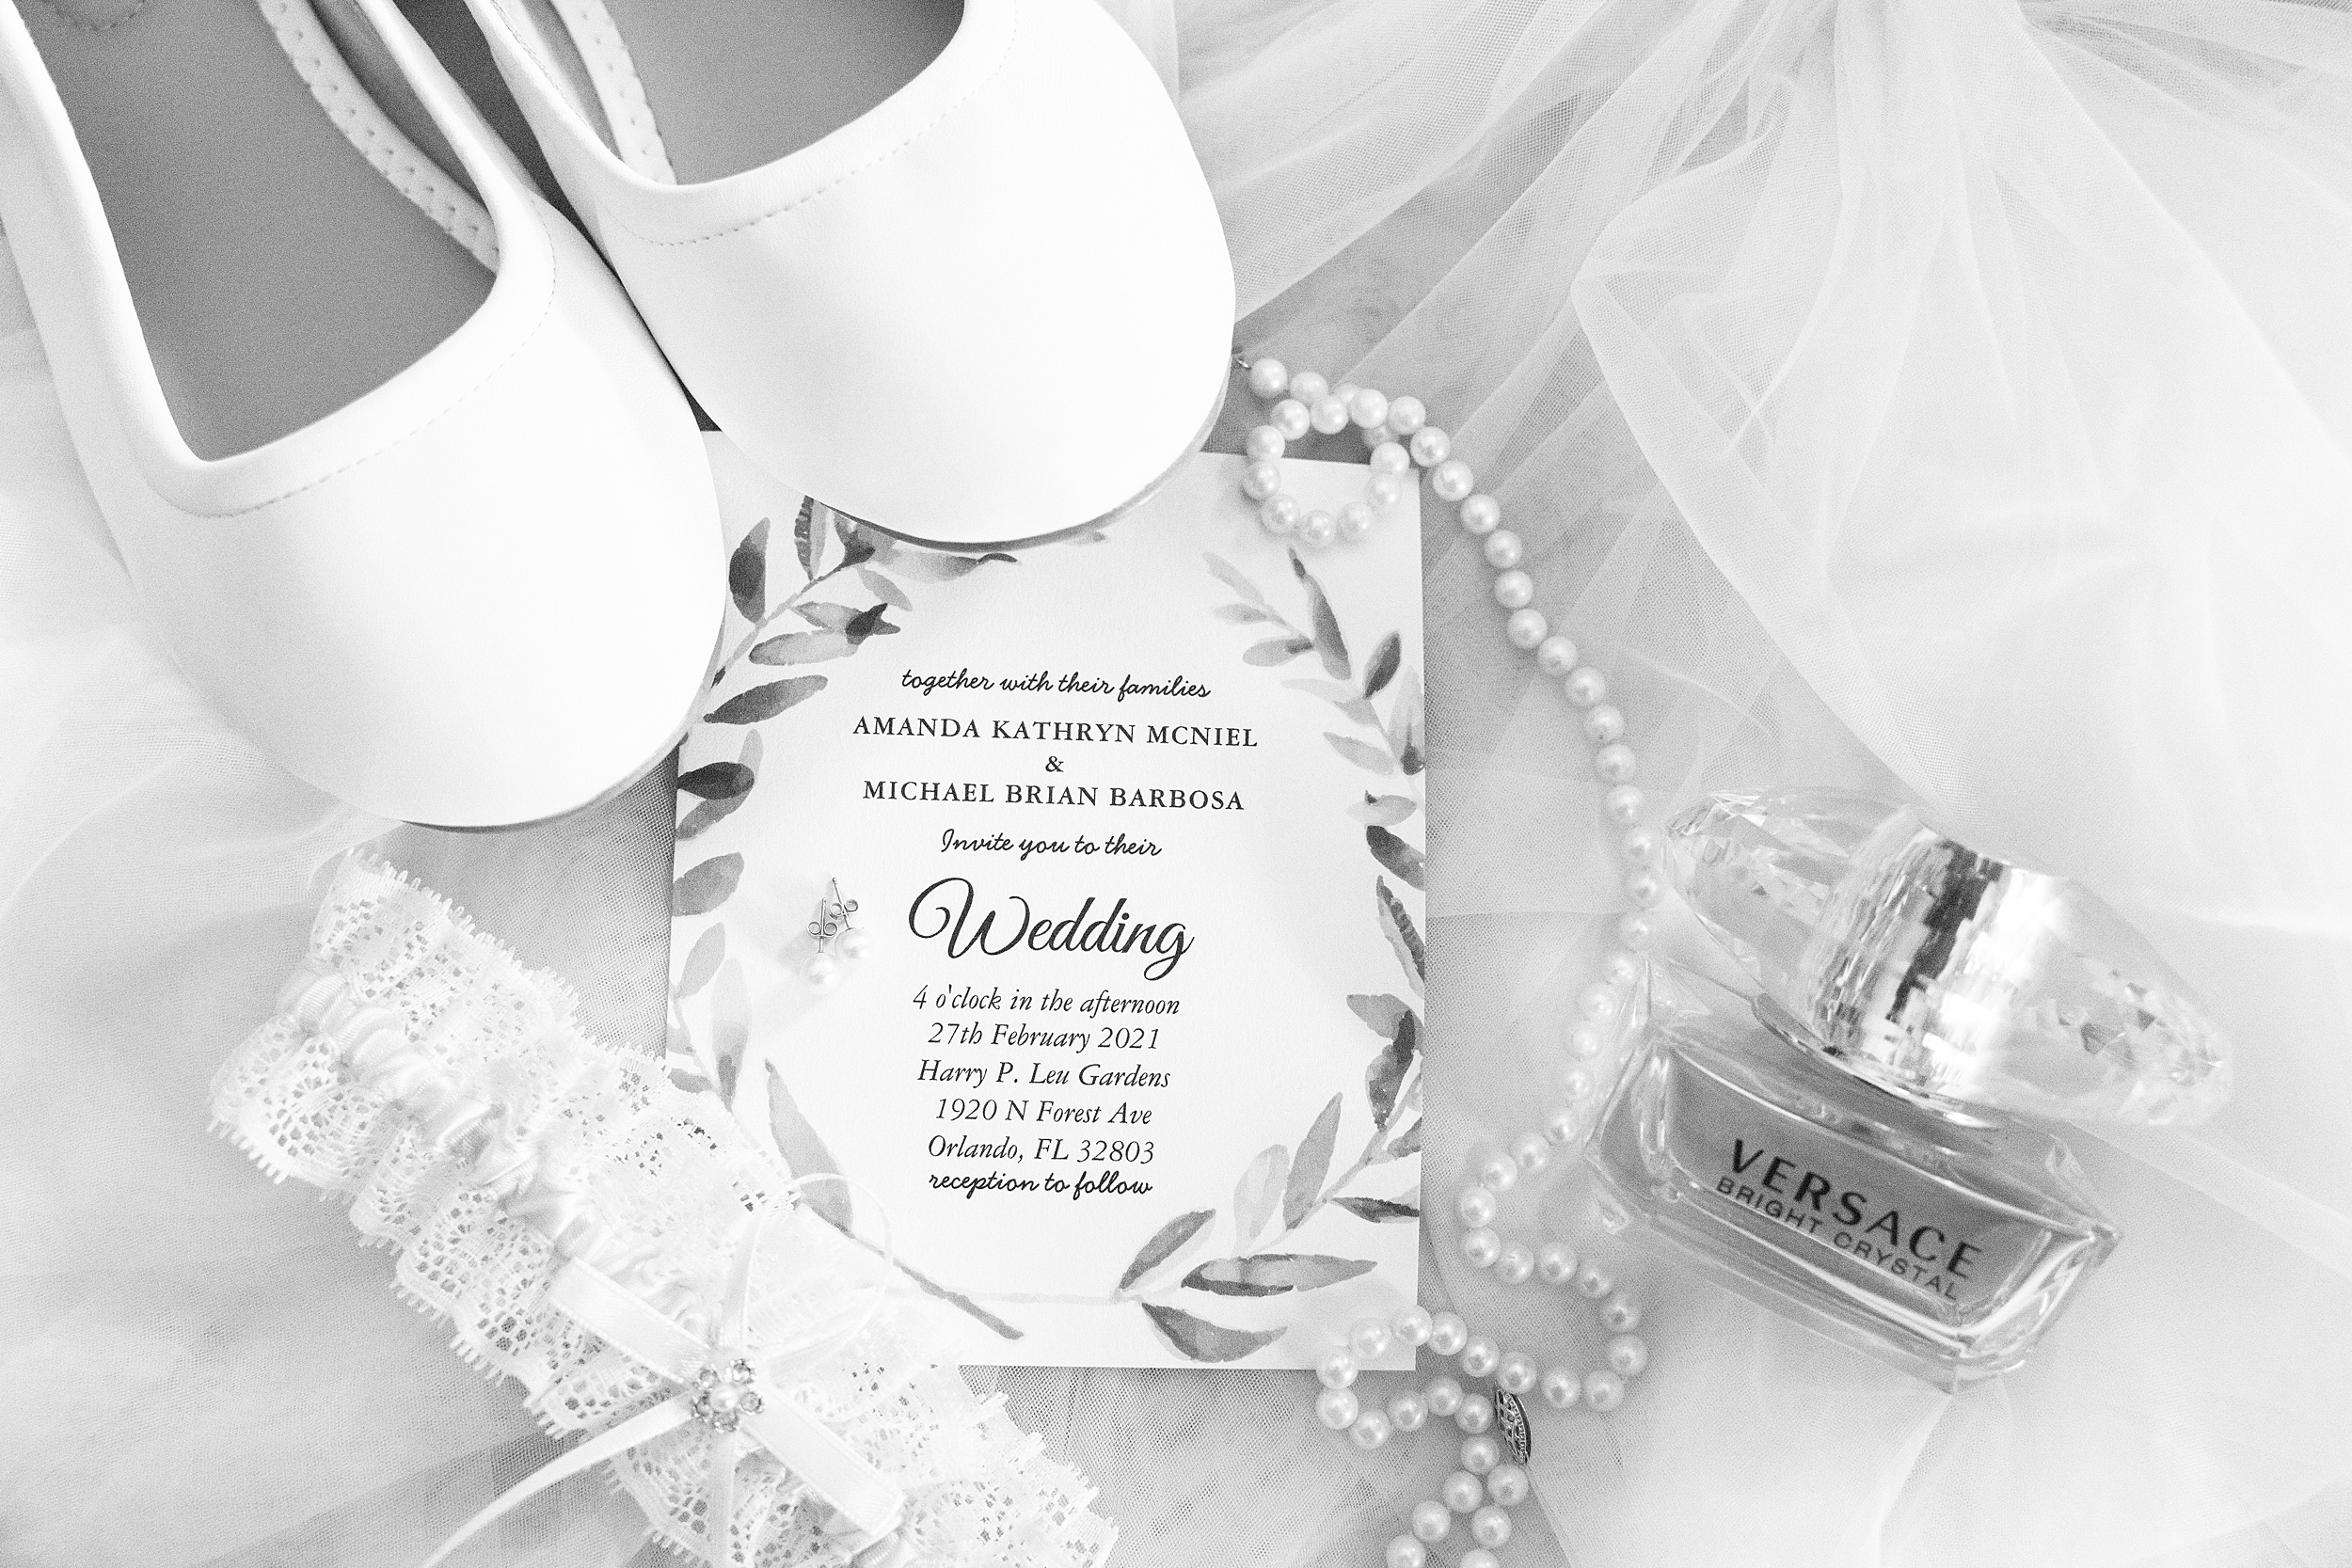 Details of a wedding invitation with bridal details on a table covered with a veil